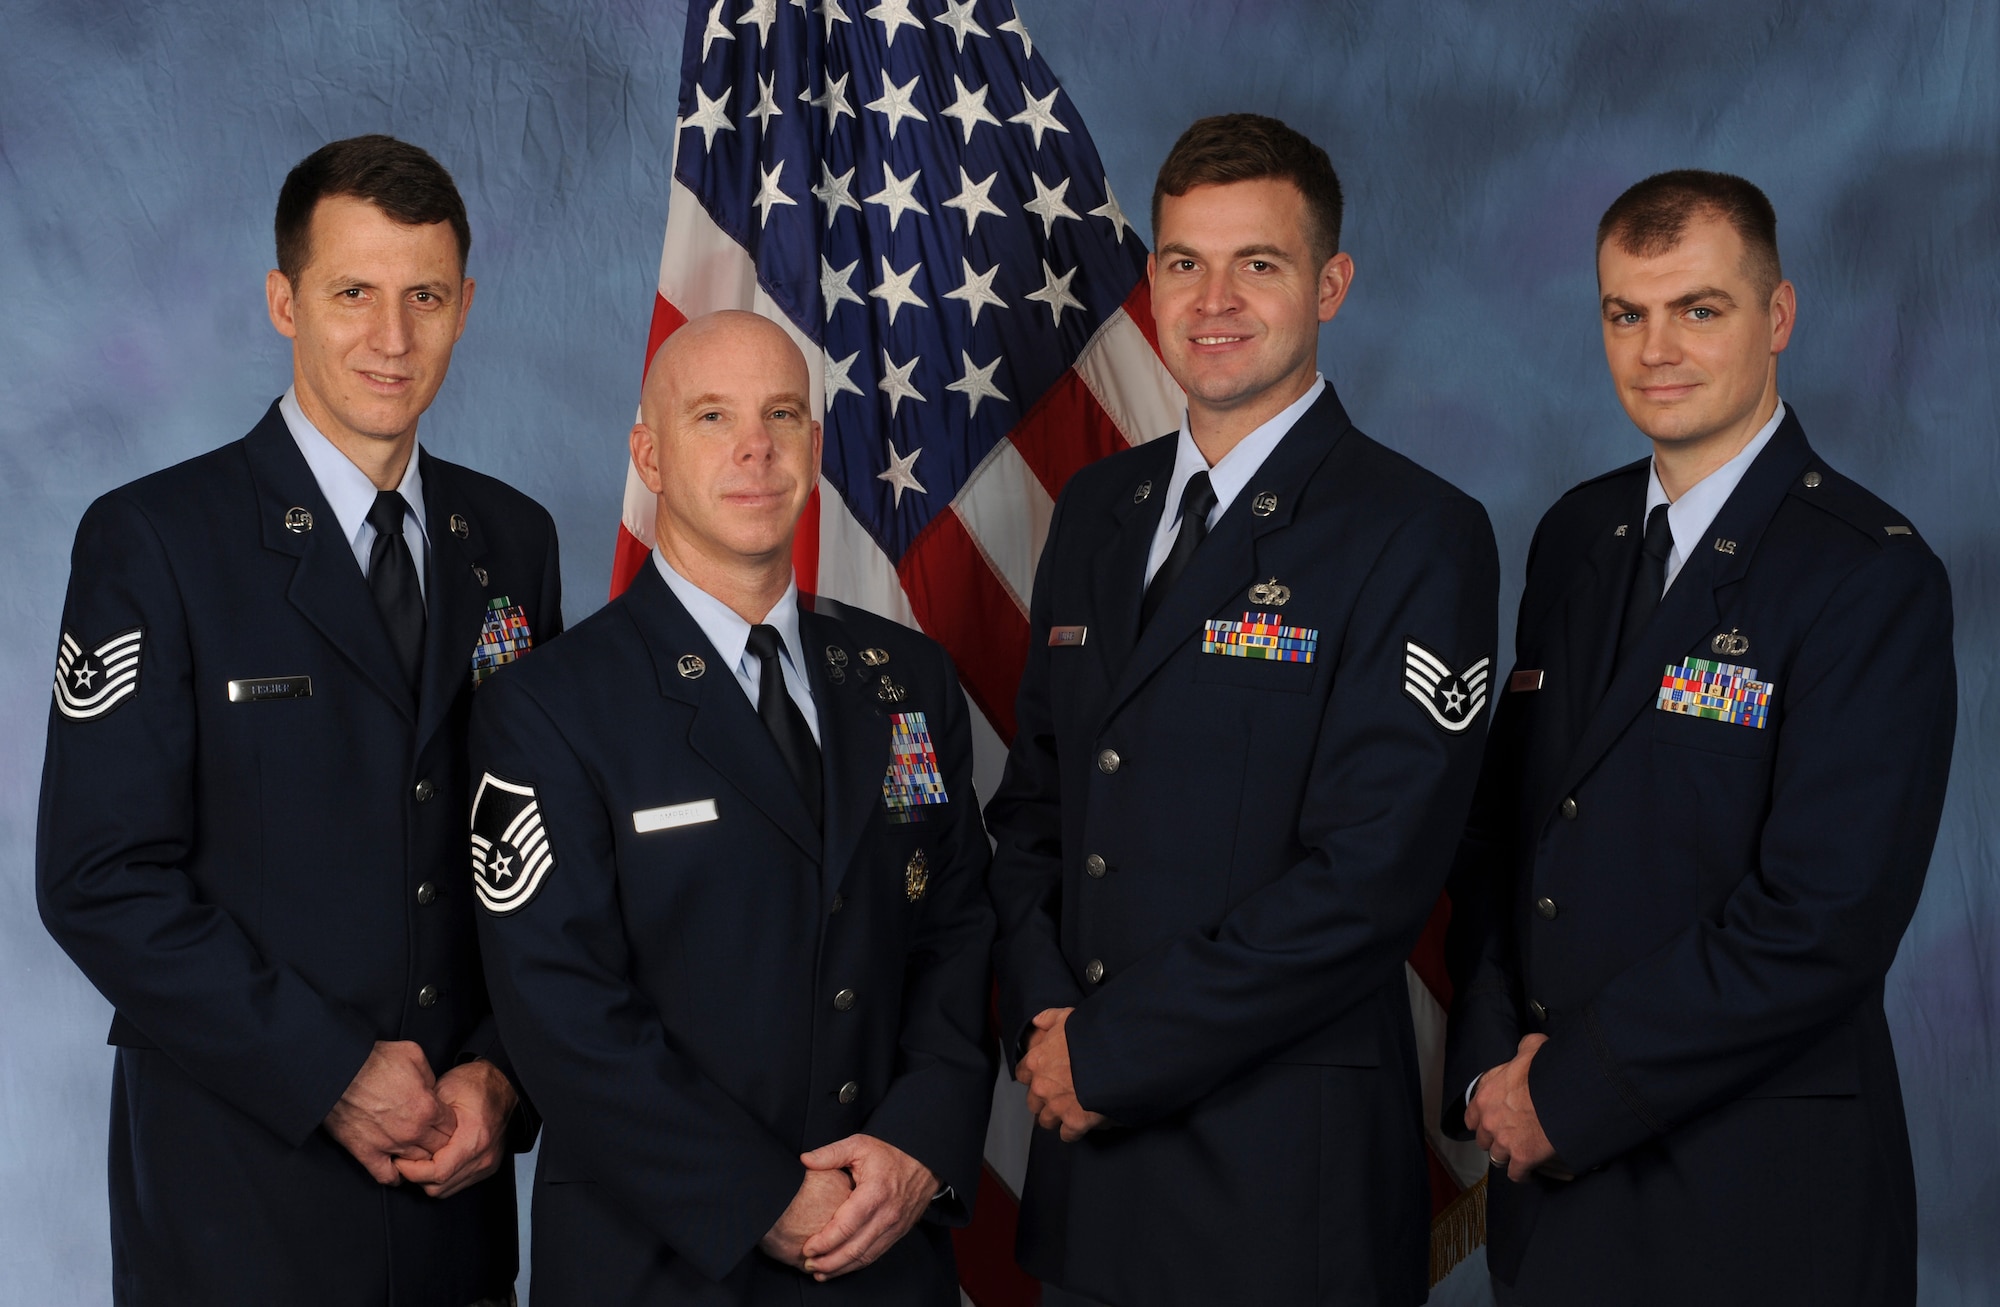 Members of the Oregon Air National Guard's 123rd Weather Flight were recently recognized with the U.S. Air Force's Outstanding Technical Achievement in Weather Operations Award. From left to right are: Tech. Sgt. Michael Fischer, Master Sgt. Ken Campbell, Staff Sgt. Matt Jenkins, and Lt. Mark Gibson. The four Airmen volunteered for a six-month duty in Haiti following the devastating earthquake there, in January, 2010.  (U.S. Air Force photograph by Tech. Sgt. John Hughel, 142nd Fighter Wing Public Affairs).